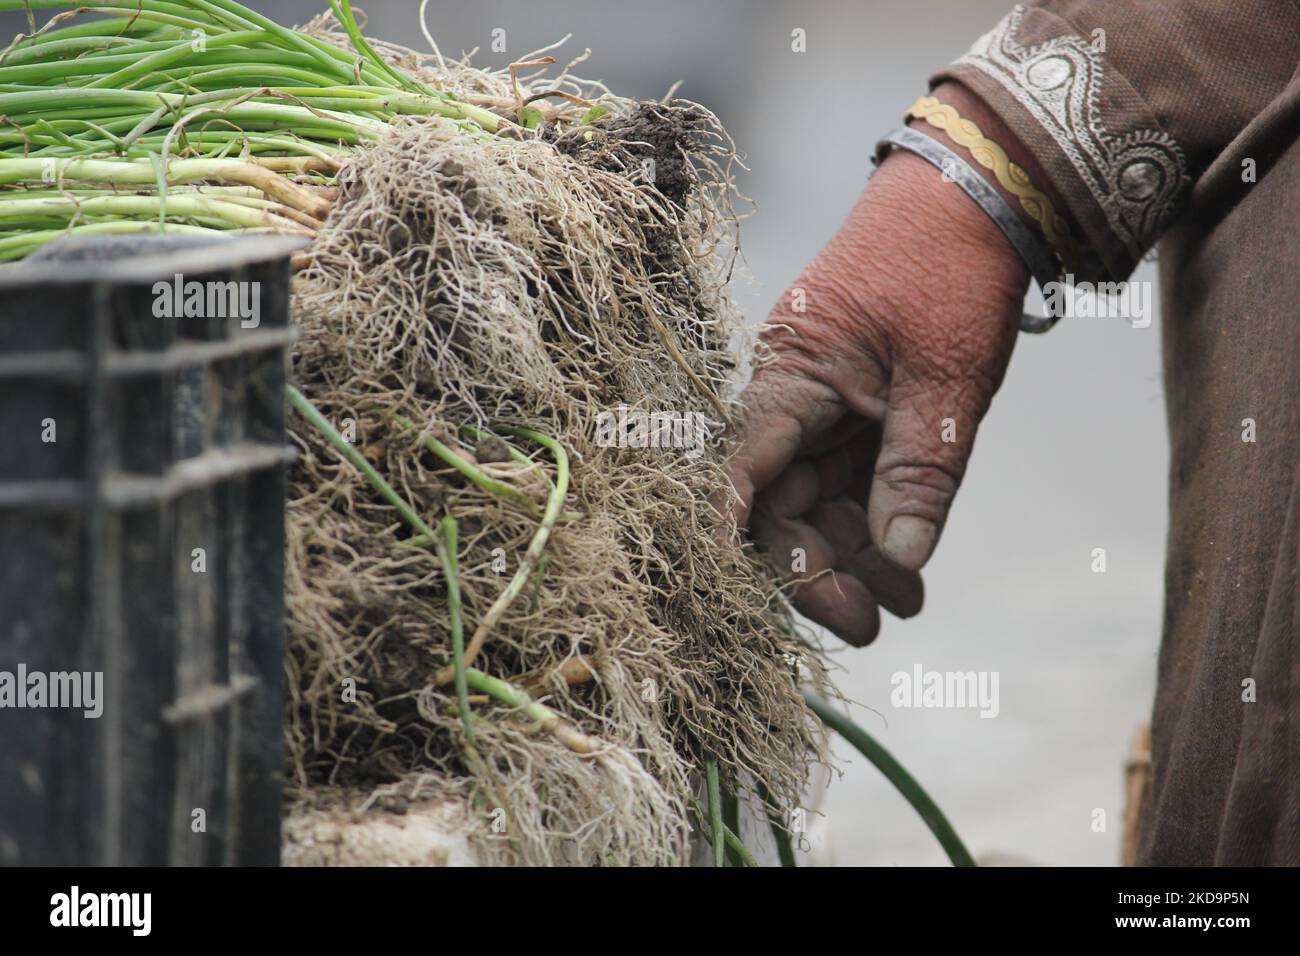 A woman touching onion plant roots which she has put on sale for farmers during a chilly winter day in Srinagar Jammu & Kashmir.. Stock Photo